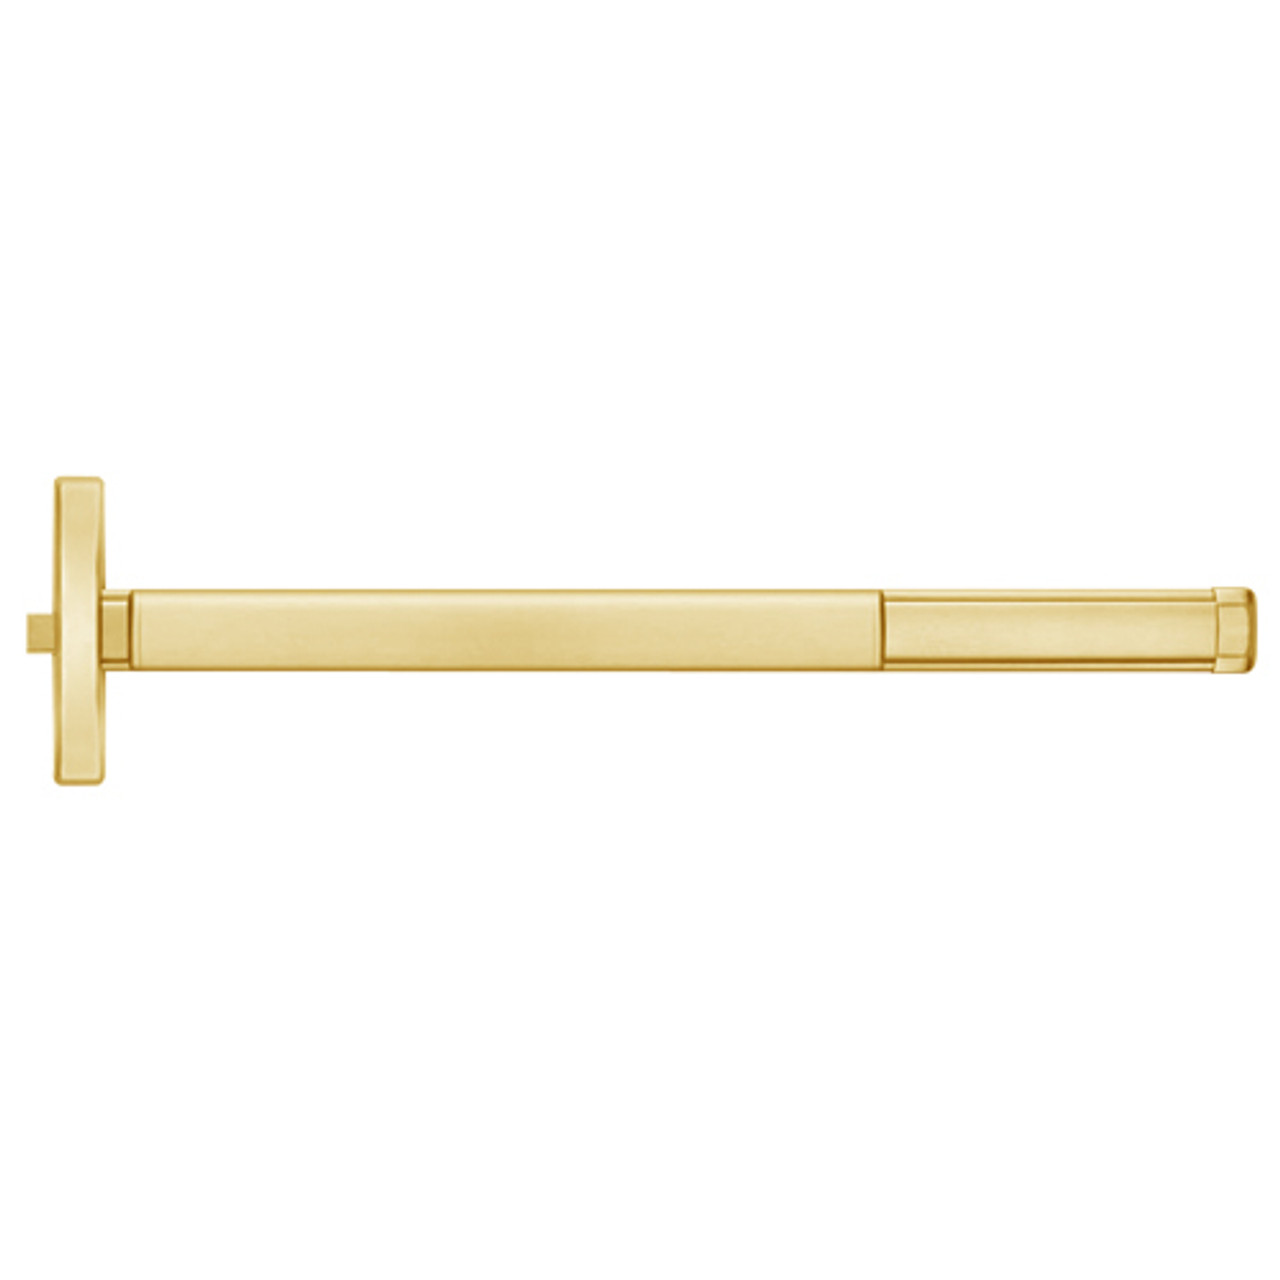 TS2408-605-48 PHI 2400 Series Non Fire Rated Apex Rim Exit Device with Touchbar Monitoring Switch Prepped for Key Controls Lever in Bright Brass Finish